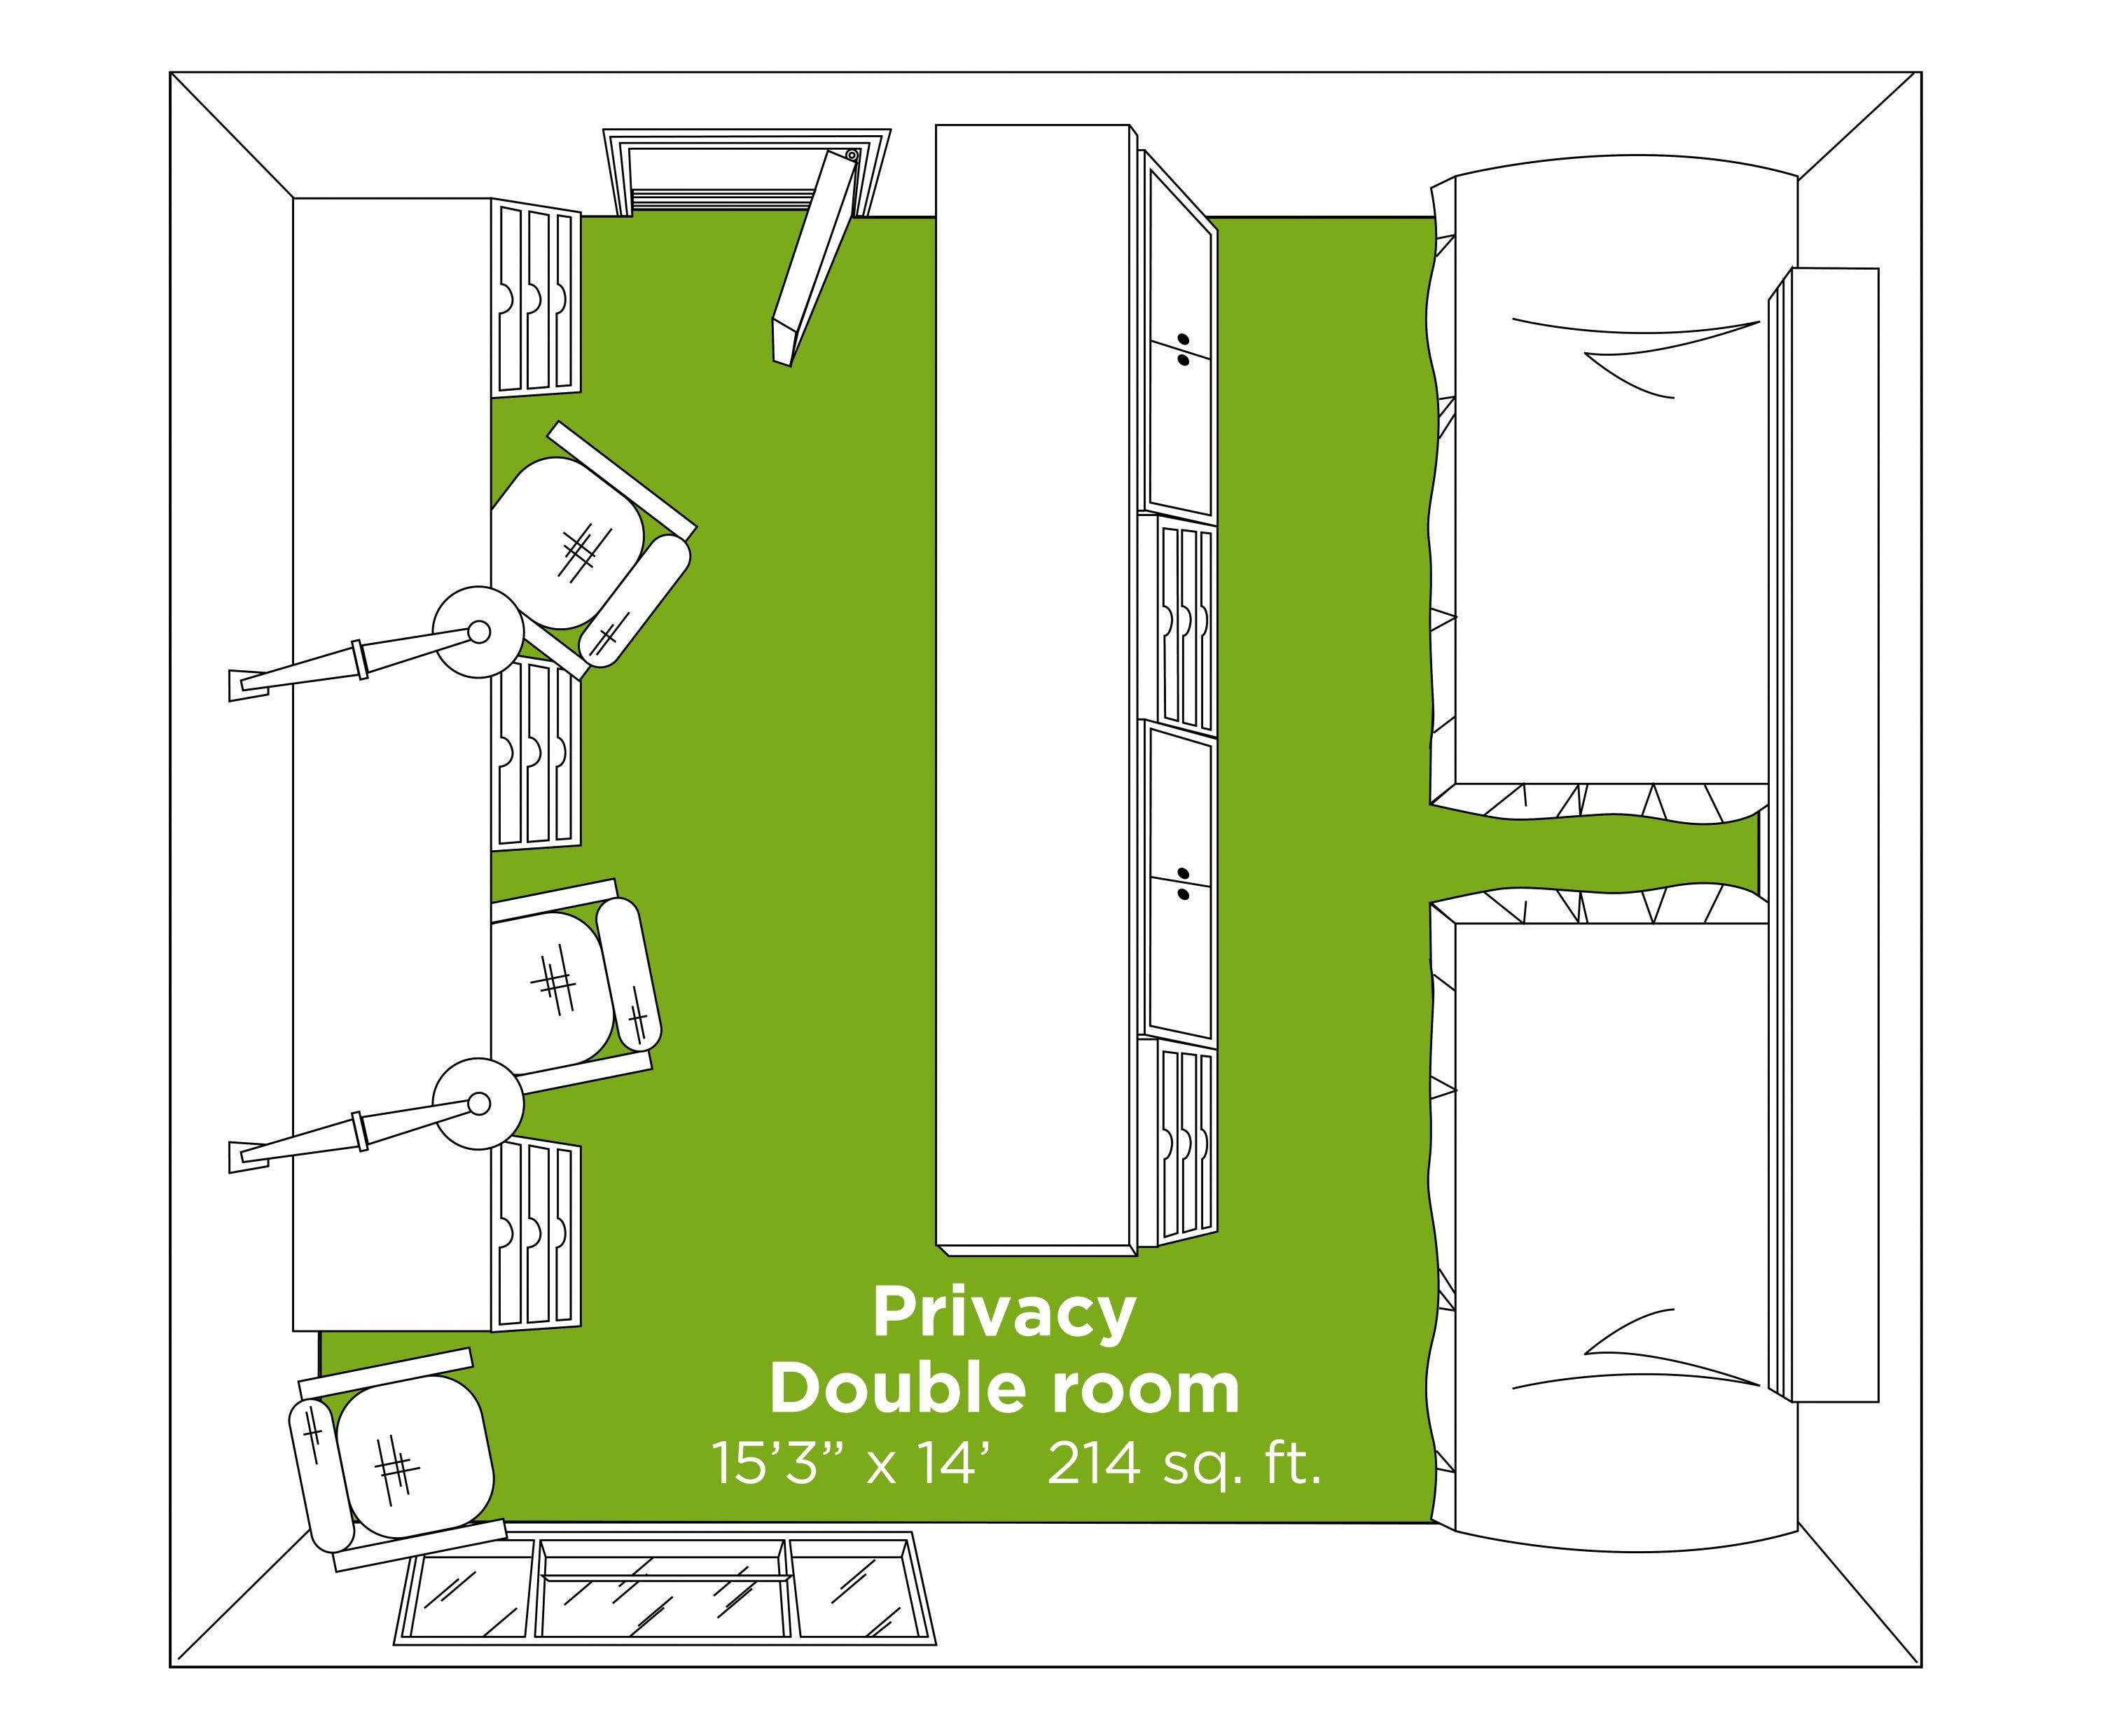 Privacy Double room layout